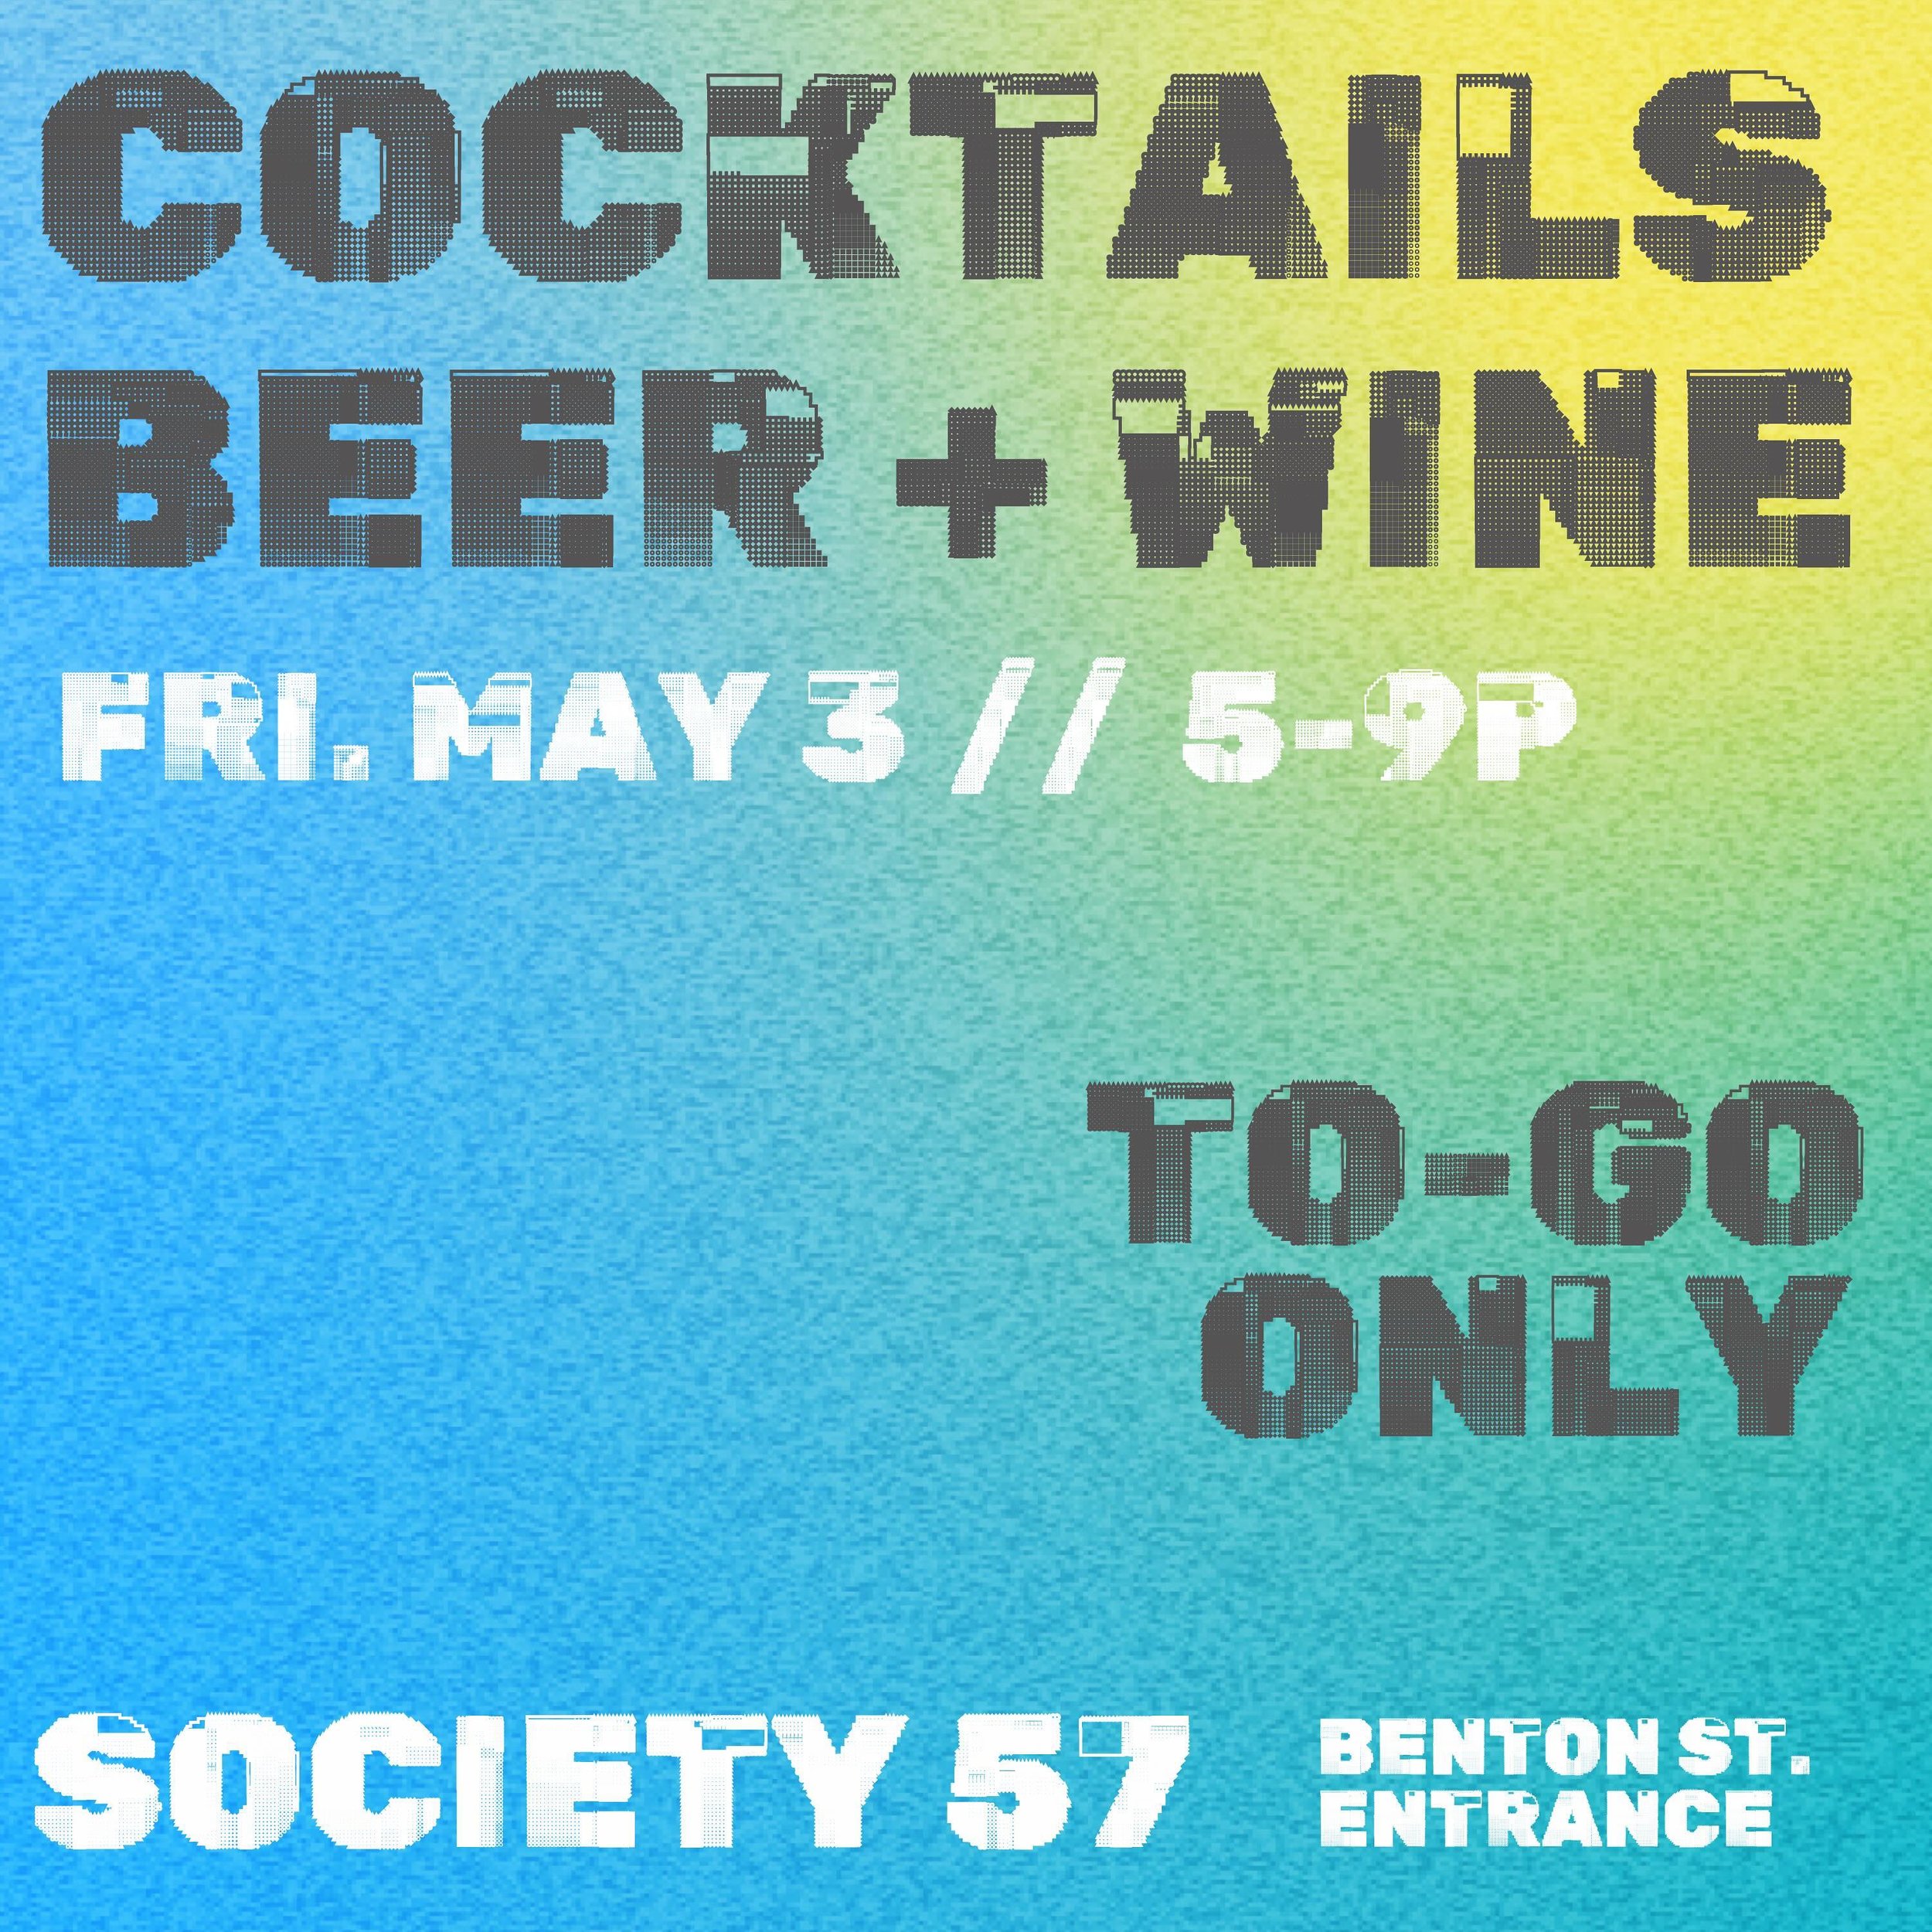 Thirsty at the Food Truck Festival? Society 57 has you covered! Swing by our Benton St. entrance from 5-9pm this Friday for cocktails, beer, and wine to sip and stroll with. 

Our building will be closed, but our walk-up bar is ready to serve you! Ra